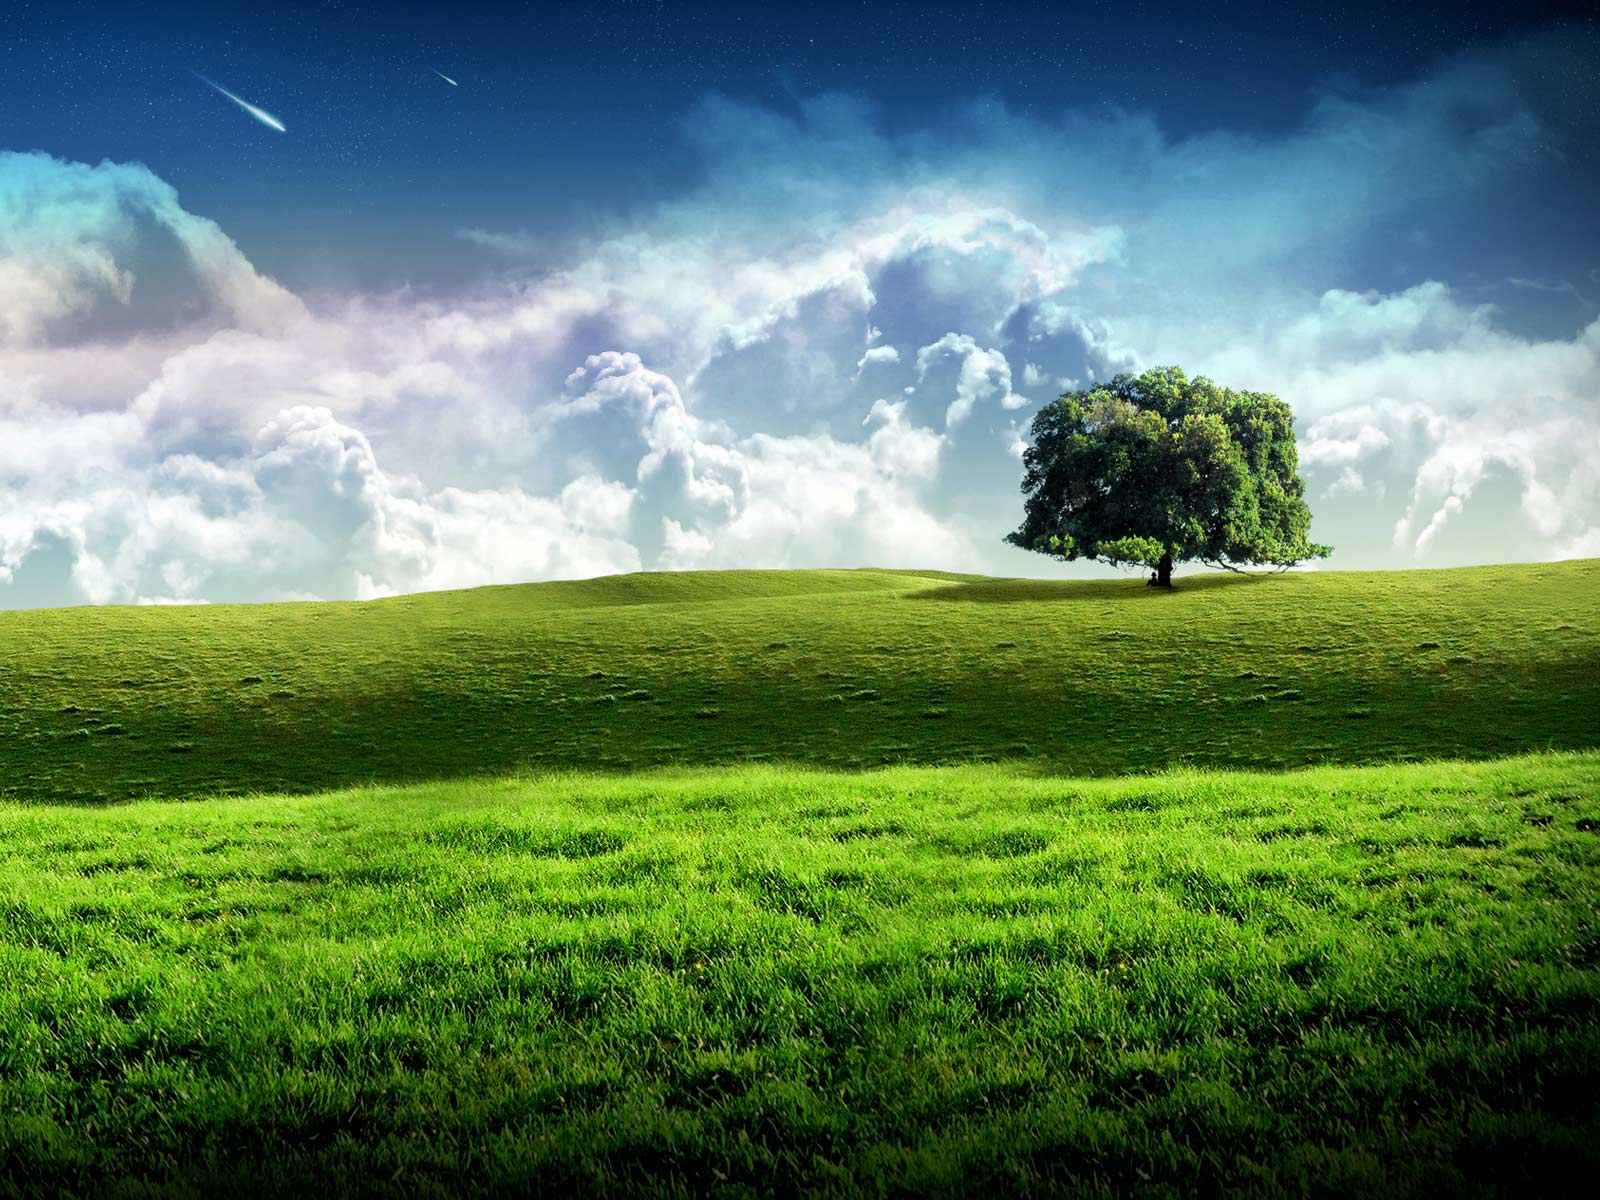 New Bliss Tree Green Landscape Scenery Wallpaper | Free Images at   - vector clip art online, royalty free & public domain